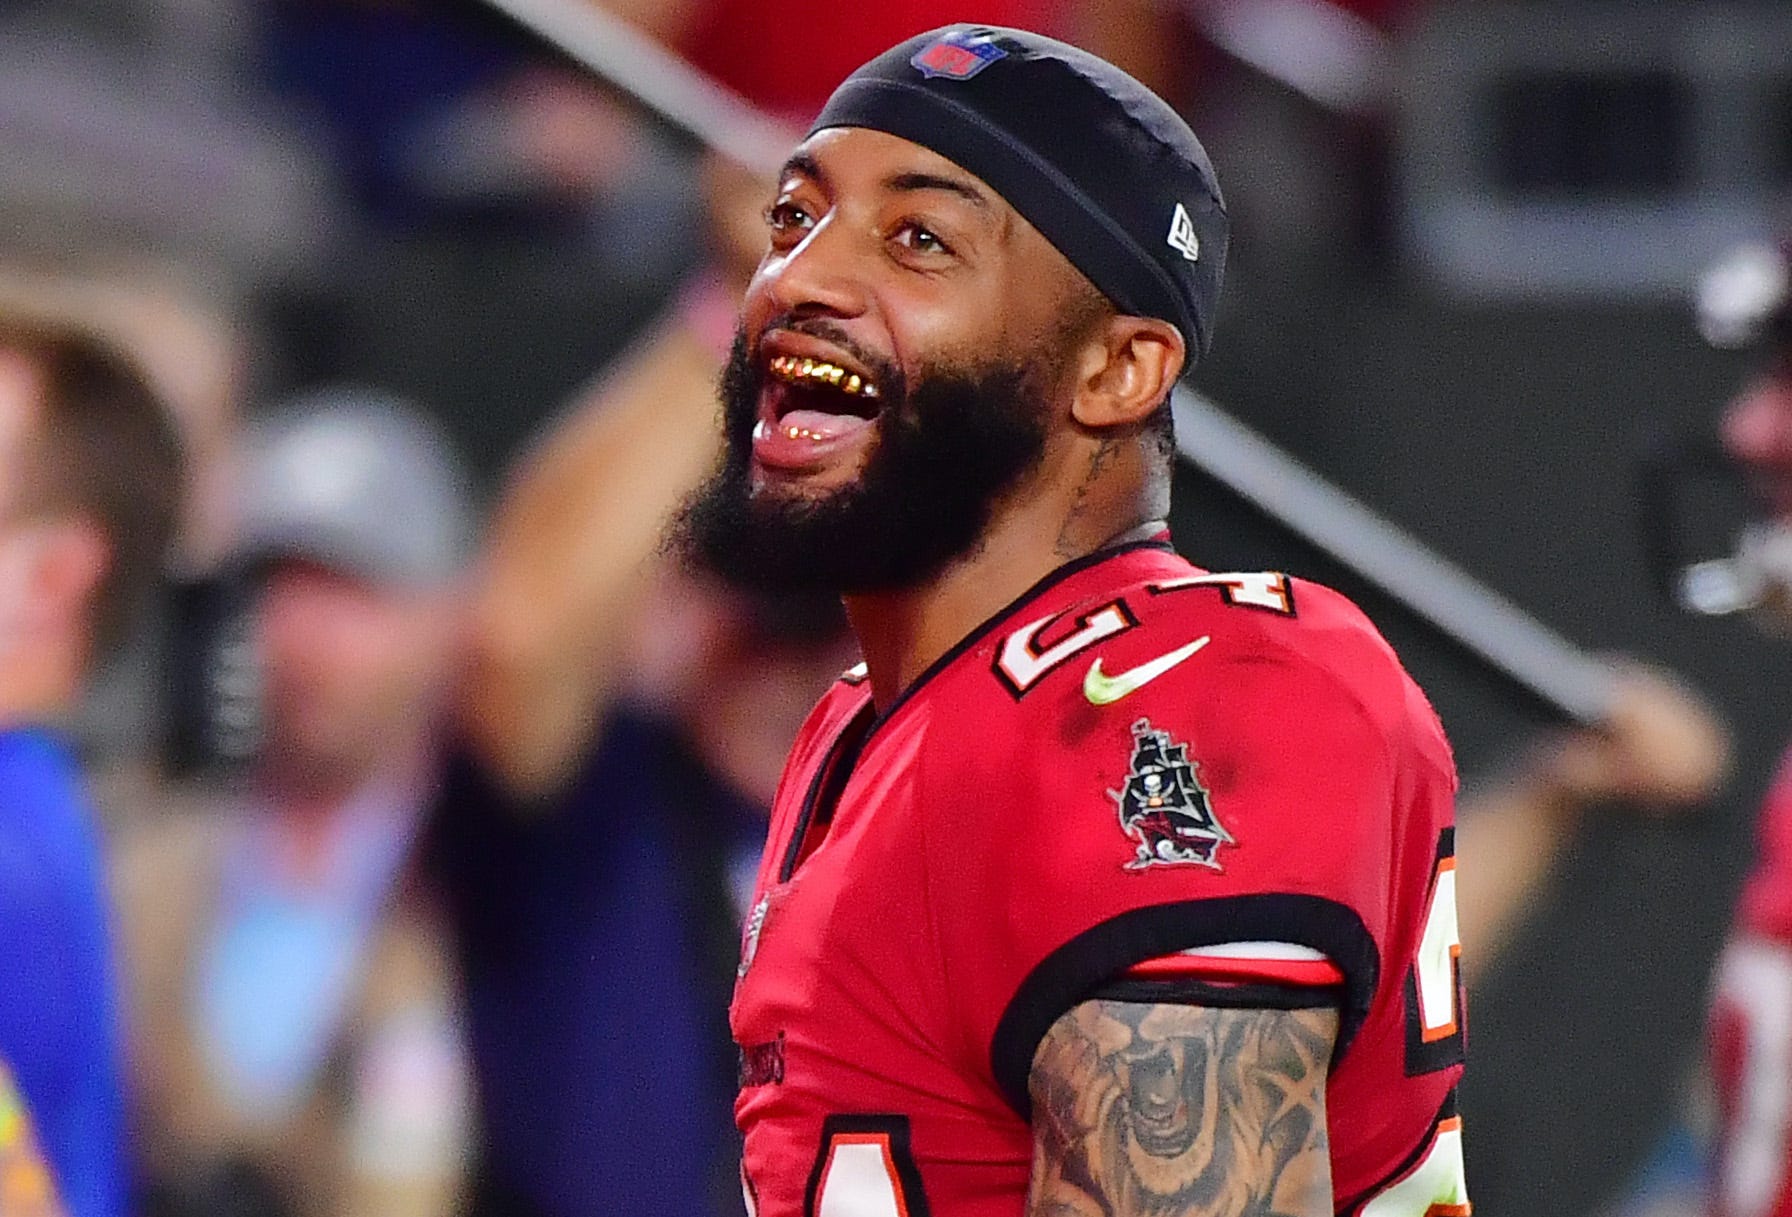 Carlton Davis: Underrate the Bucs, get punched in the mouth 